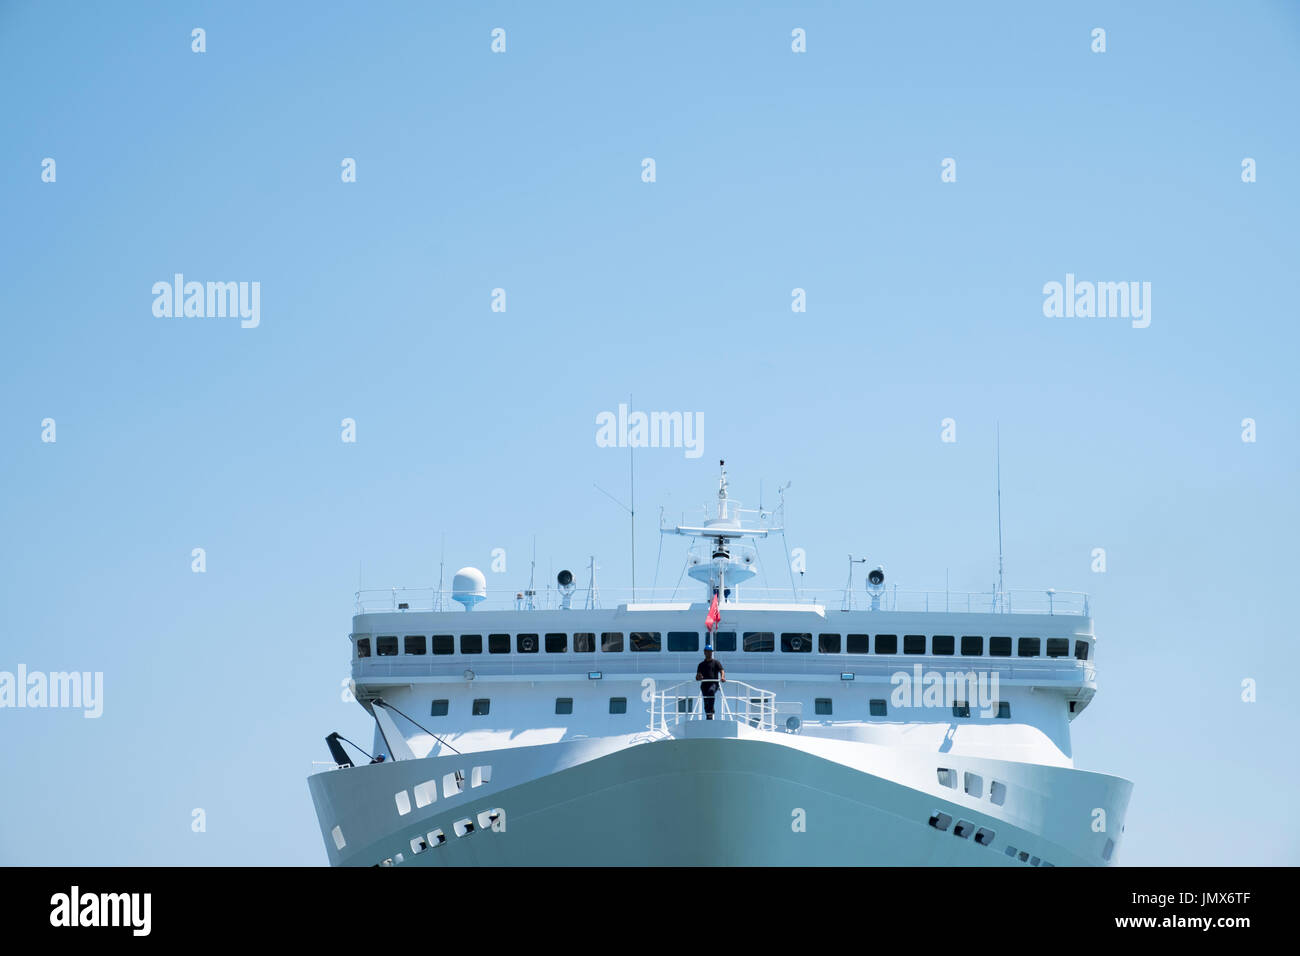 Sailor on the prow of ship as it pulls in to harbour. Greece Stock Photo